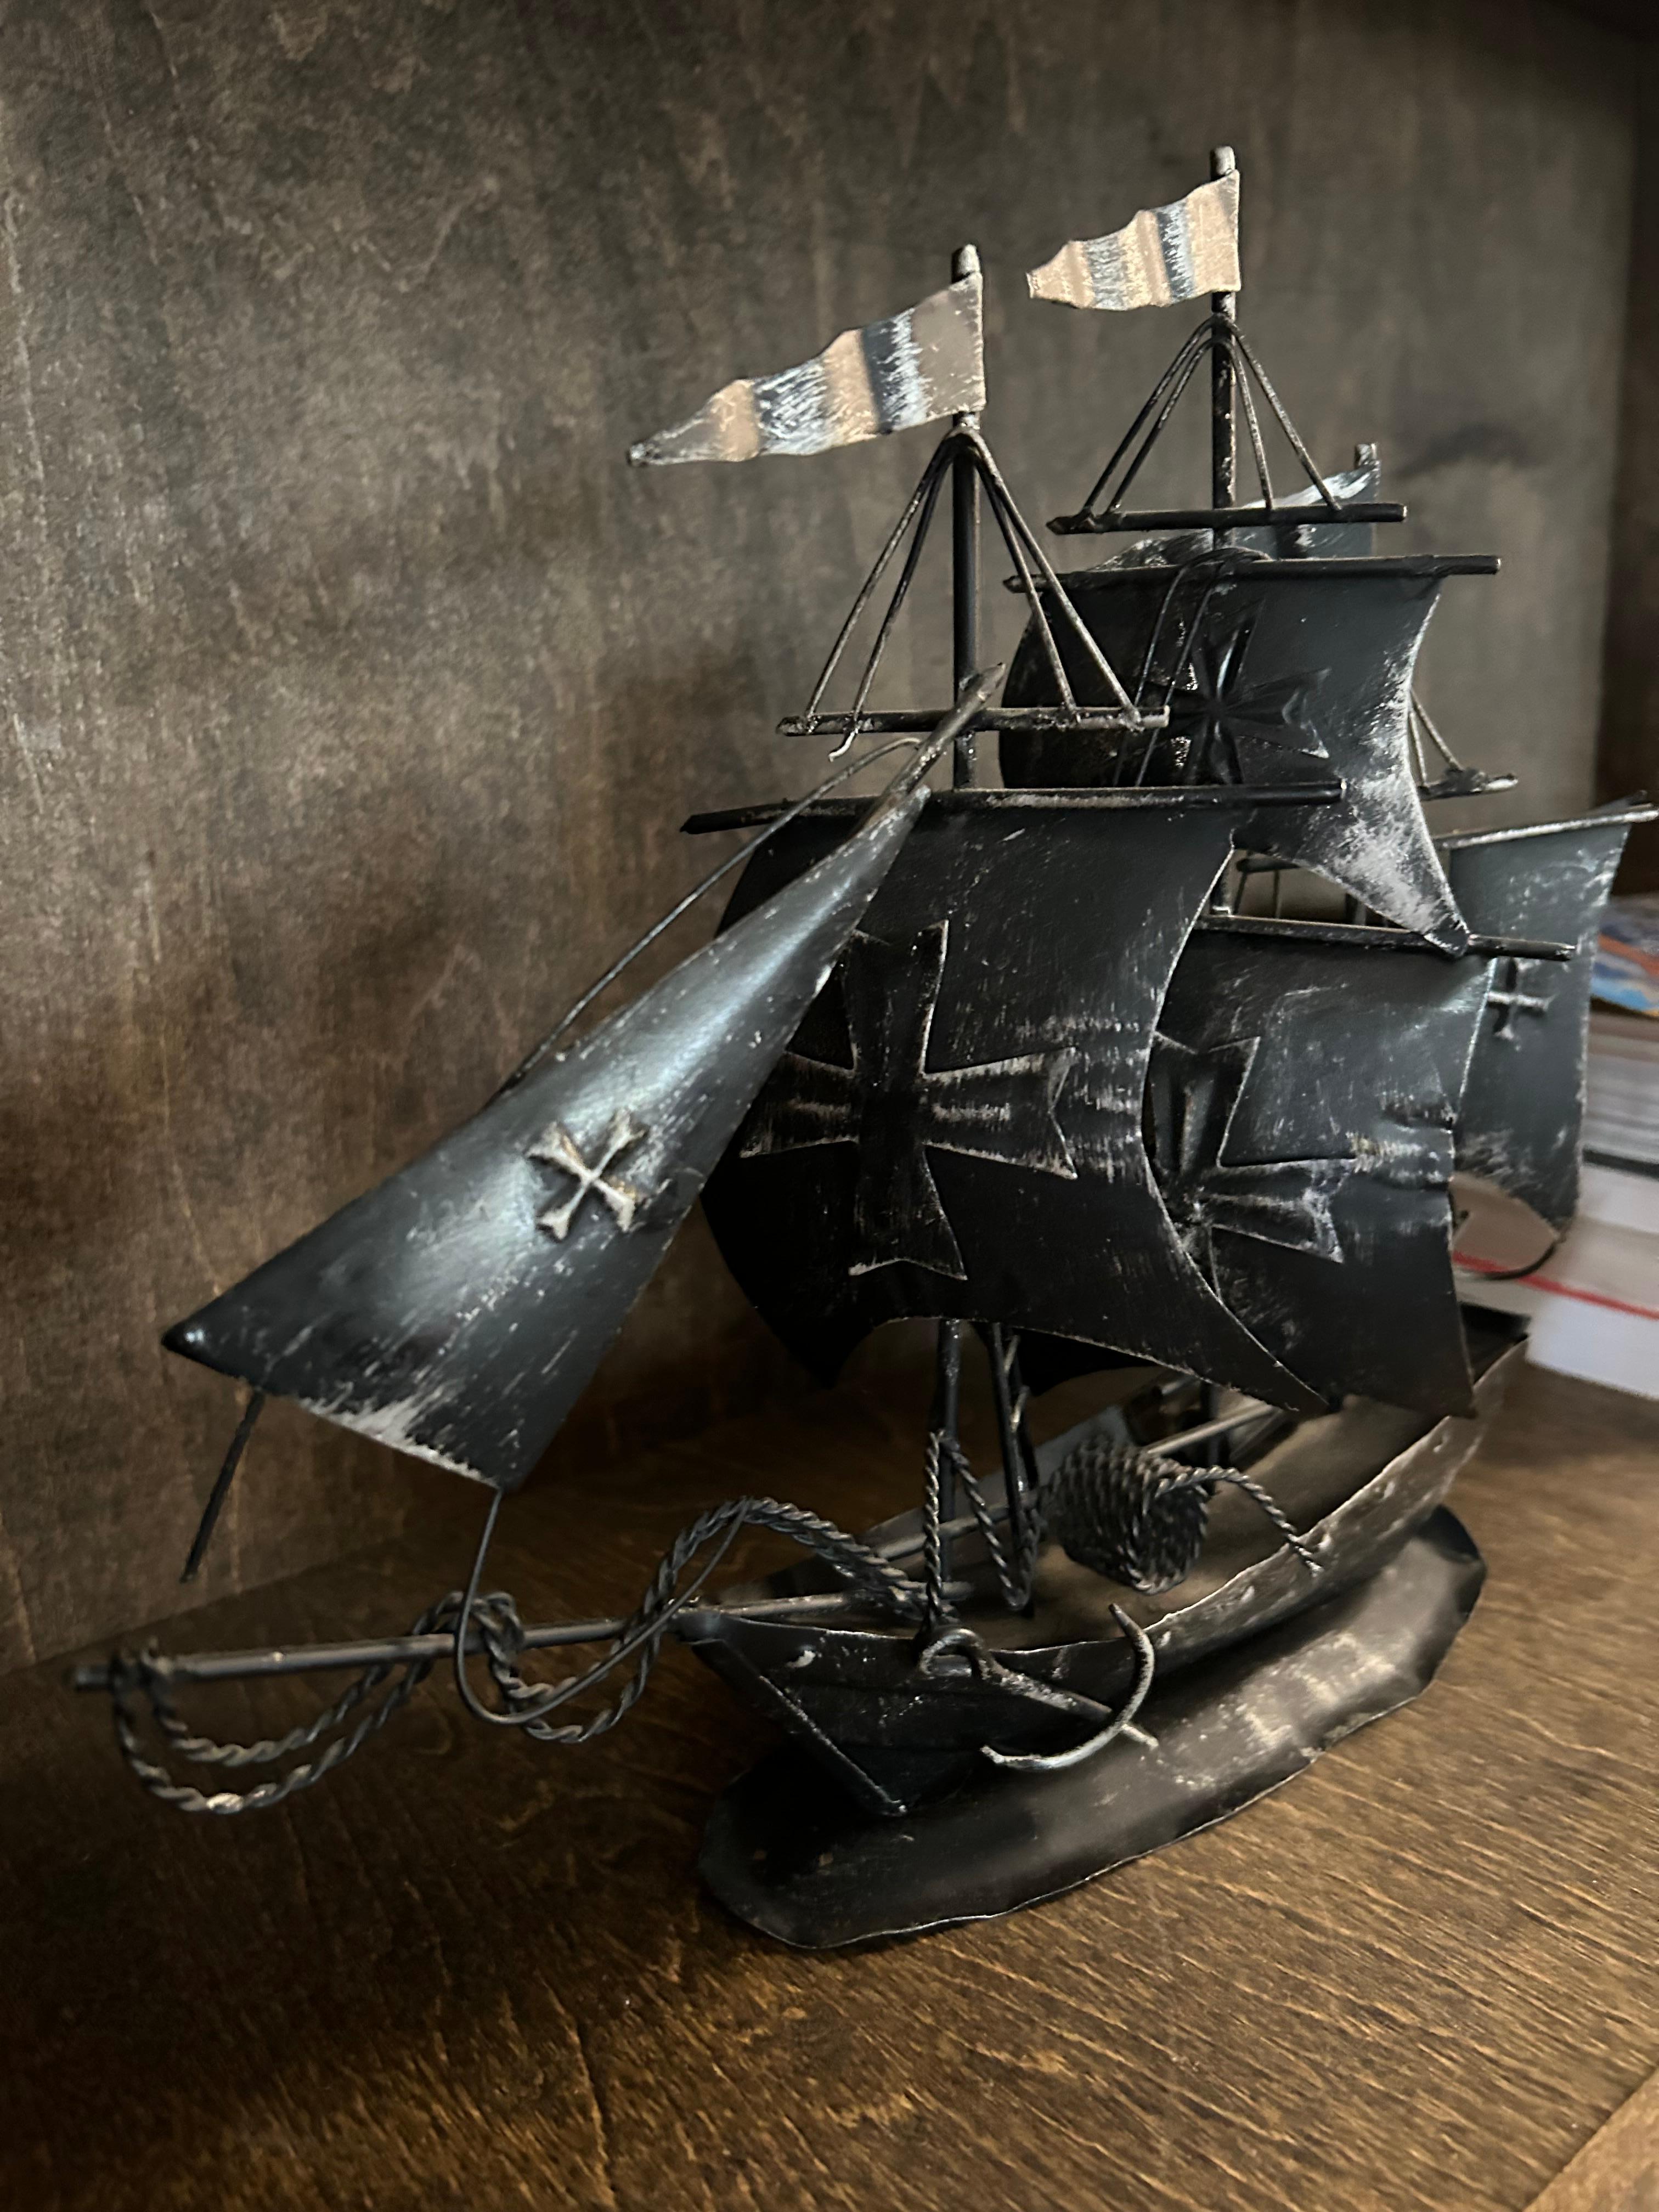 Small Vintage Hand Forged Black Metal Pirate Ship by Enesco. The metal details of this sculpture is amazing from each angle of the ship. There are minor imperfections due to age but overall there is no damage. This pirate ship is great to add to